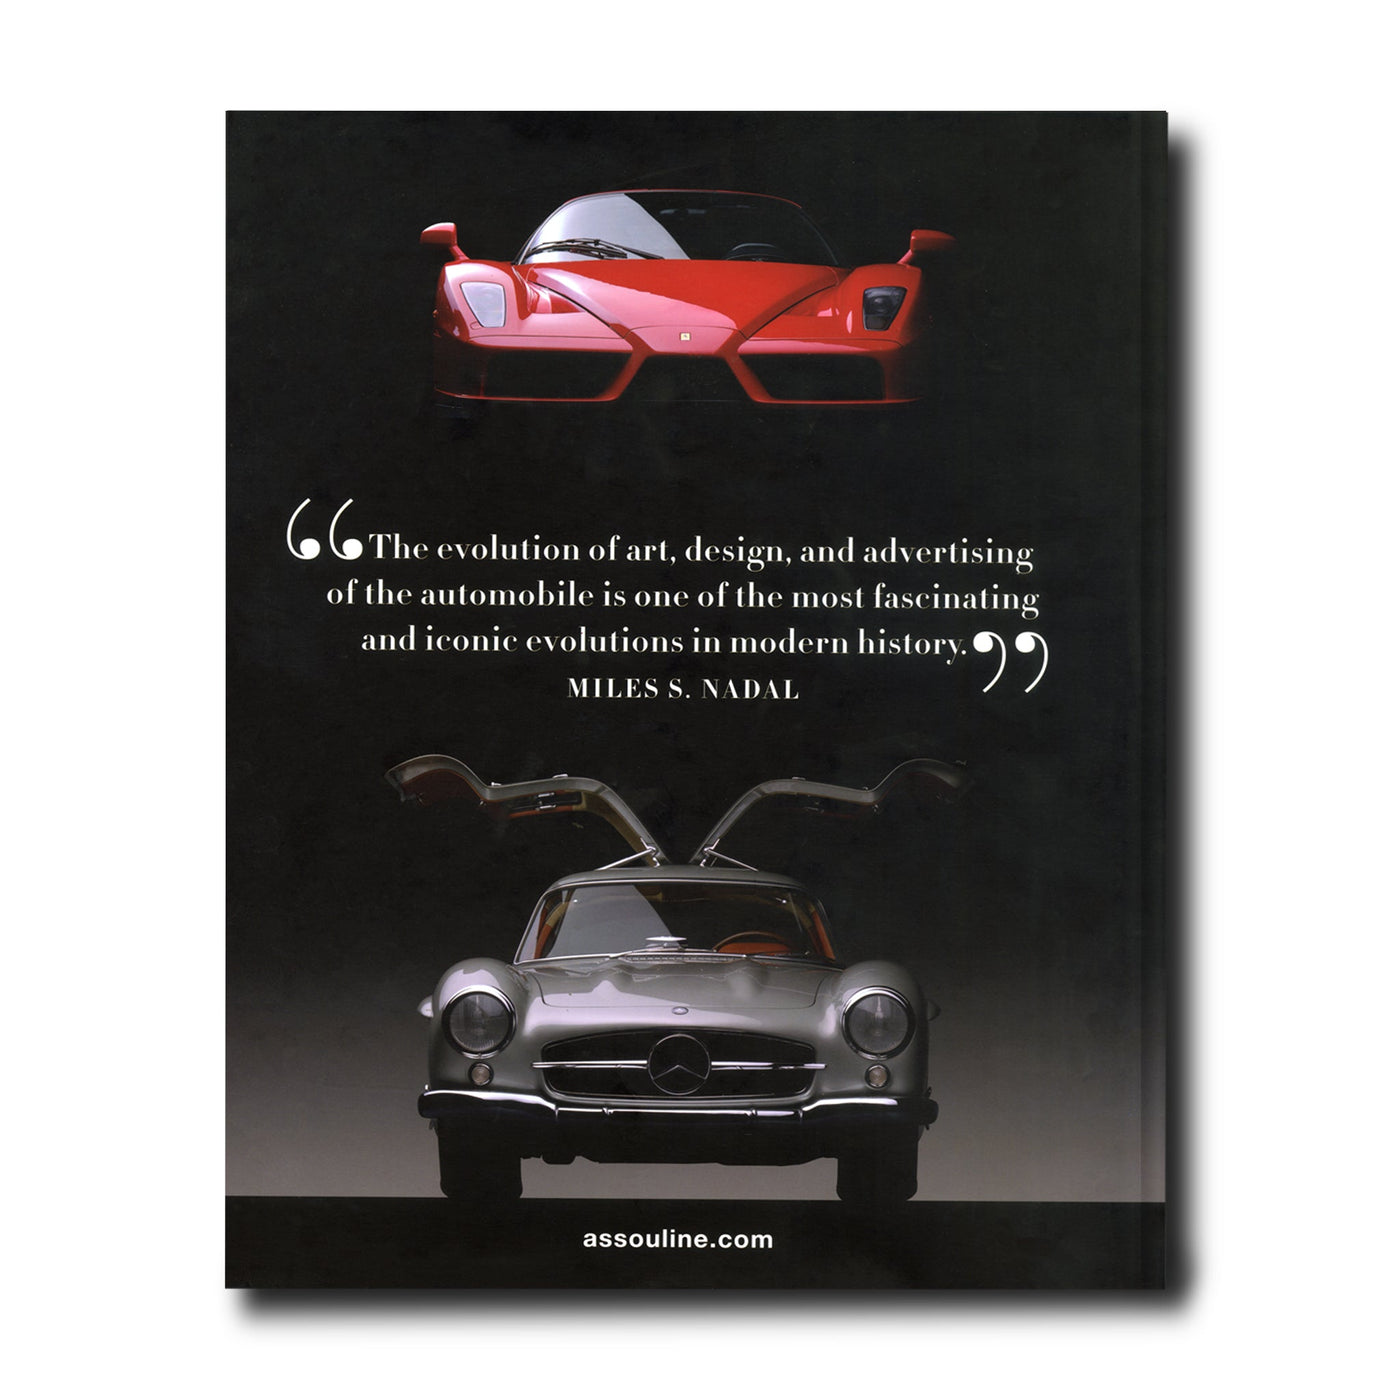 Iconic: Art, Design, Advertising, And The Automobile